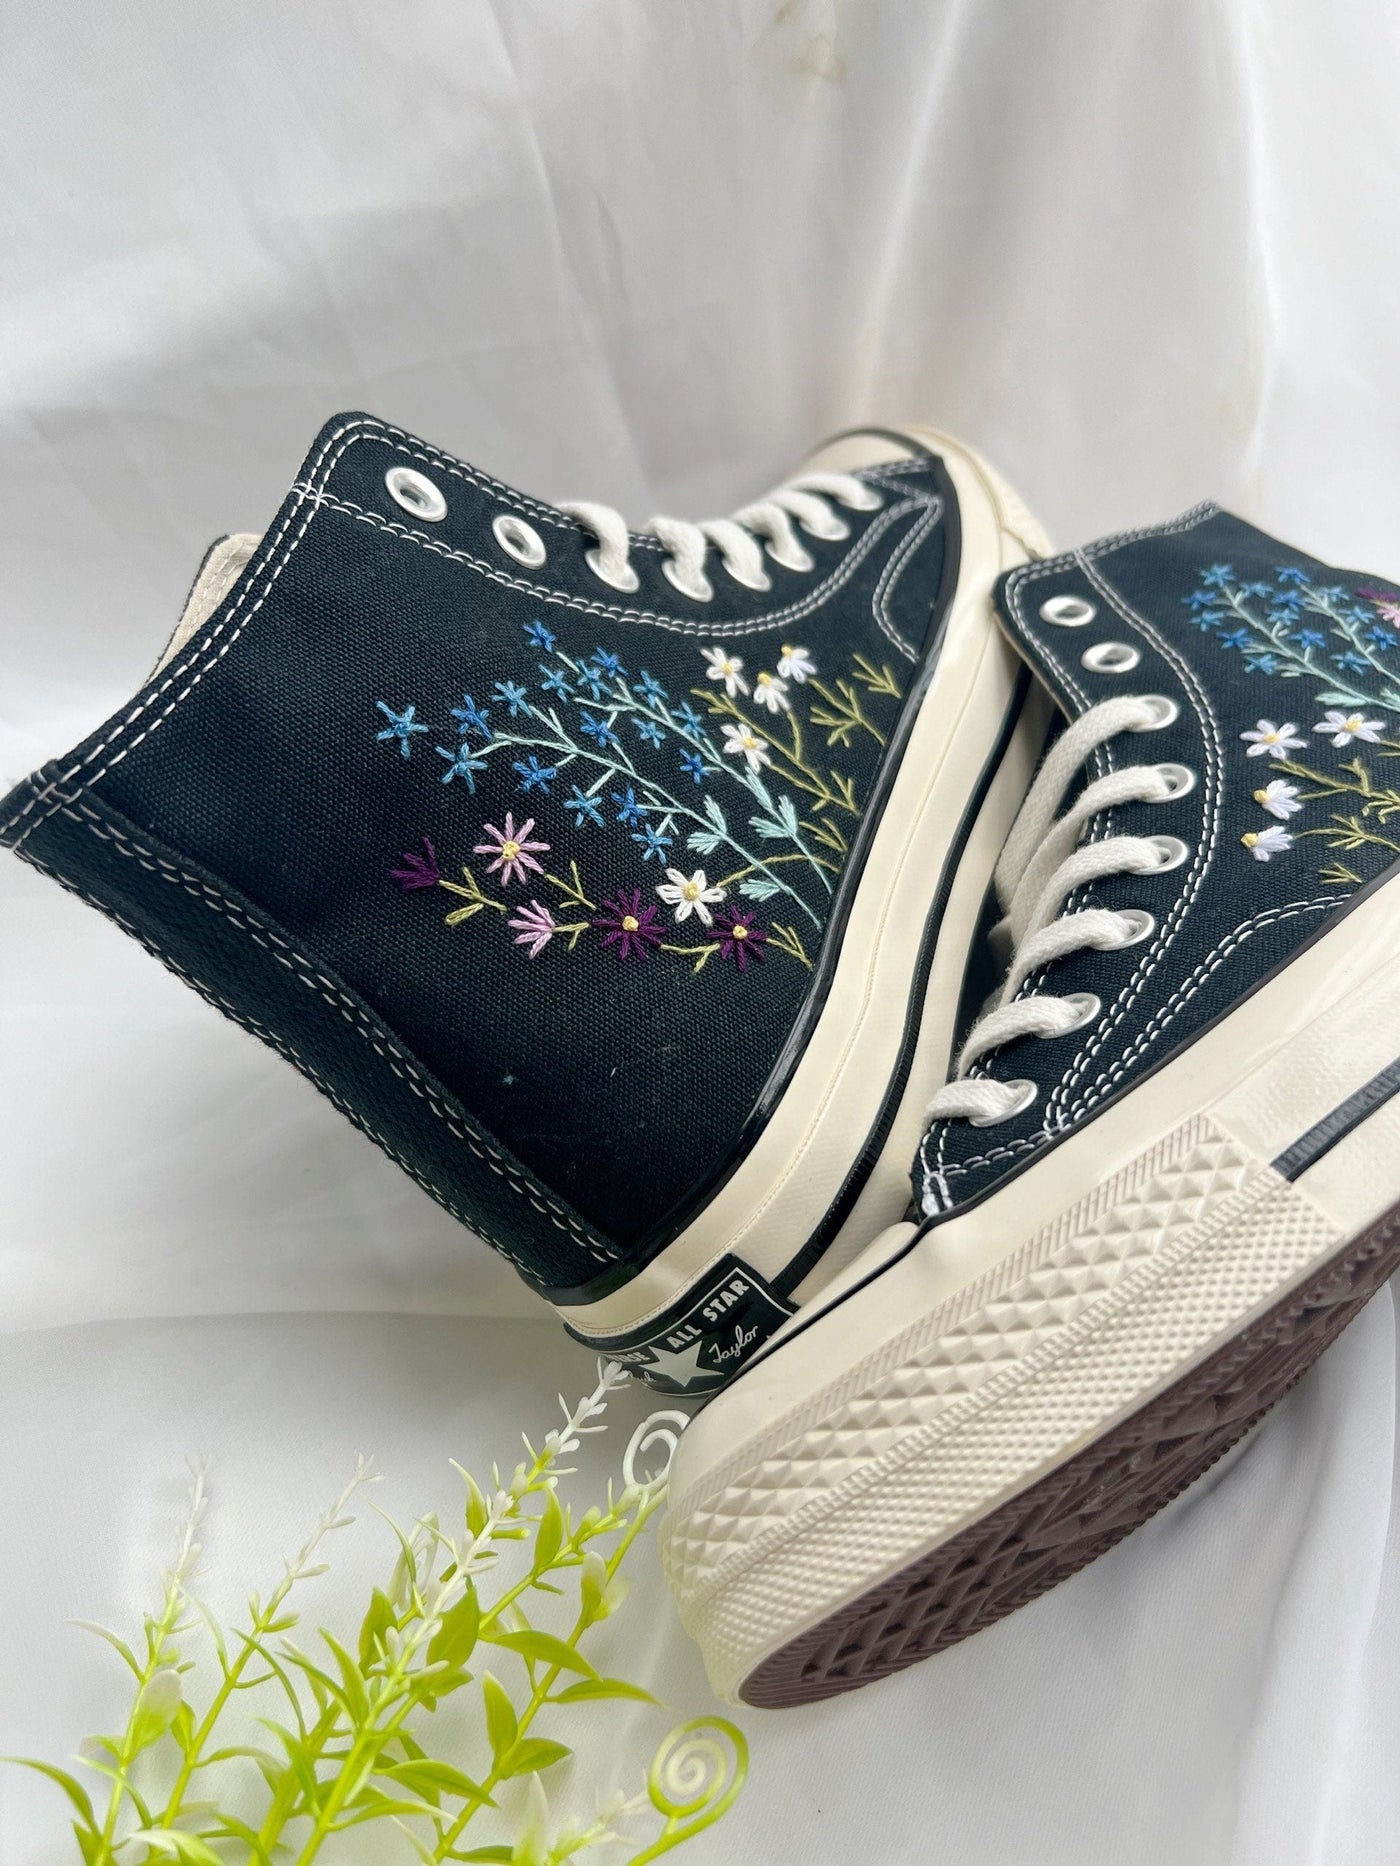 Embroidered Converse,Floral Converse,Converse High Tops,Flower Conver